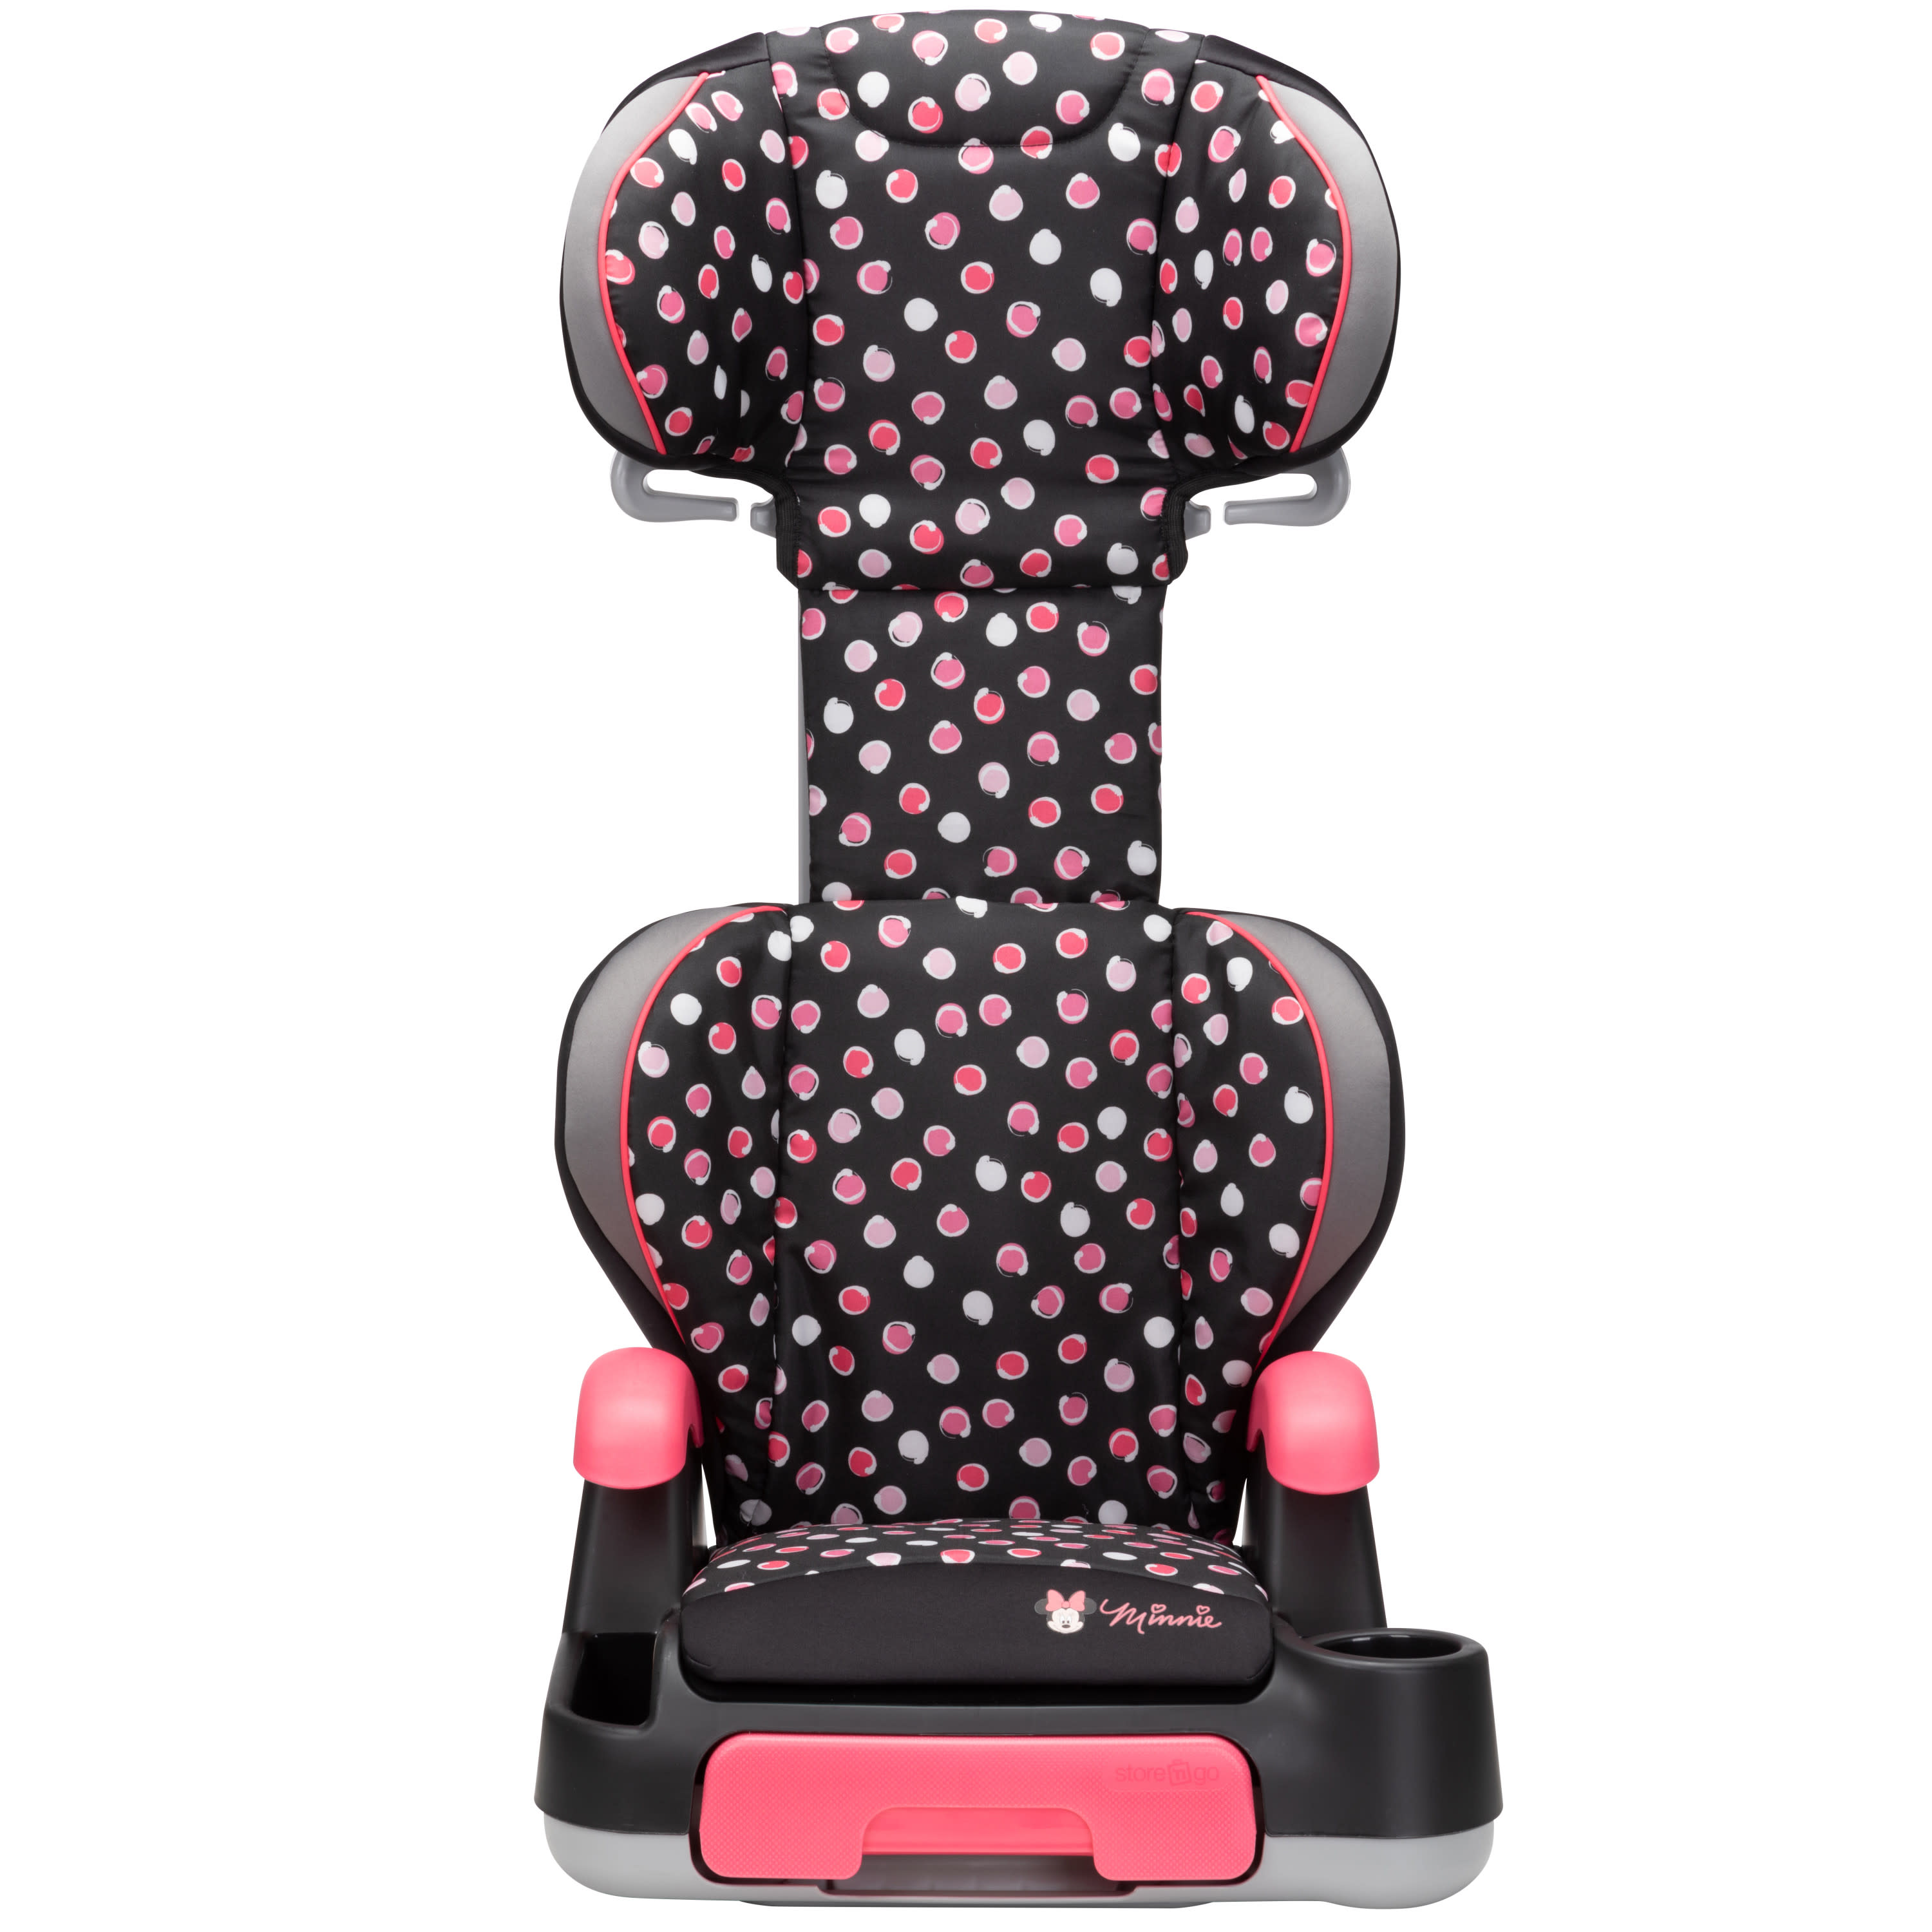 Disney Baby Store 'n Go Sport Booster Car Seat, Minnie Mash Up - image 20 of 21